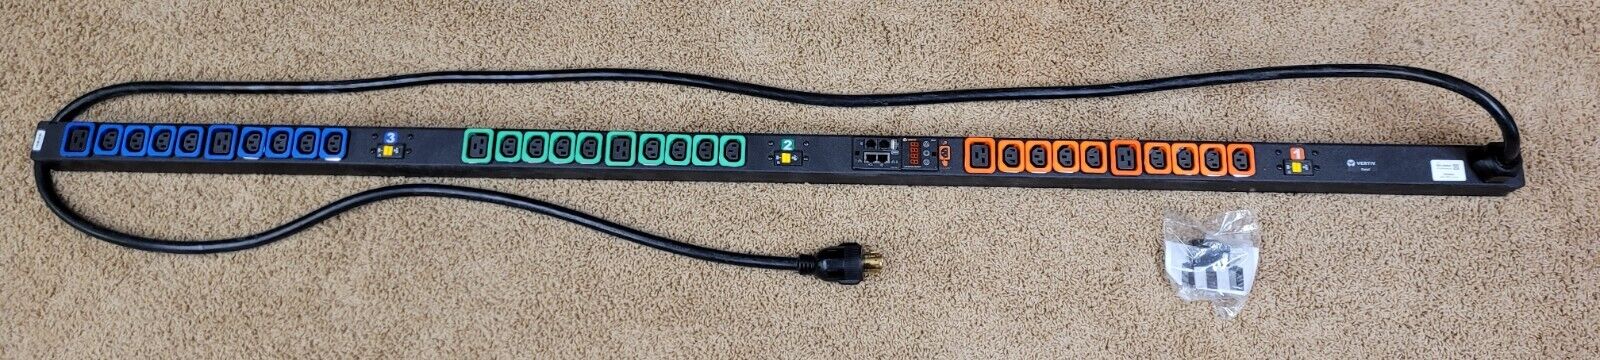 Vertiv NI30052L-Rack PDU-In/Out Monitored-Switched-[24xC13][6xC19] - L15-30P